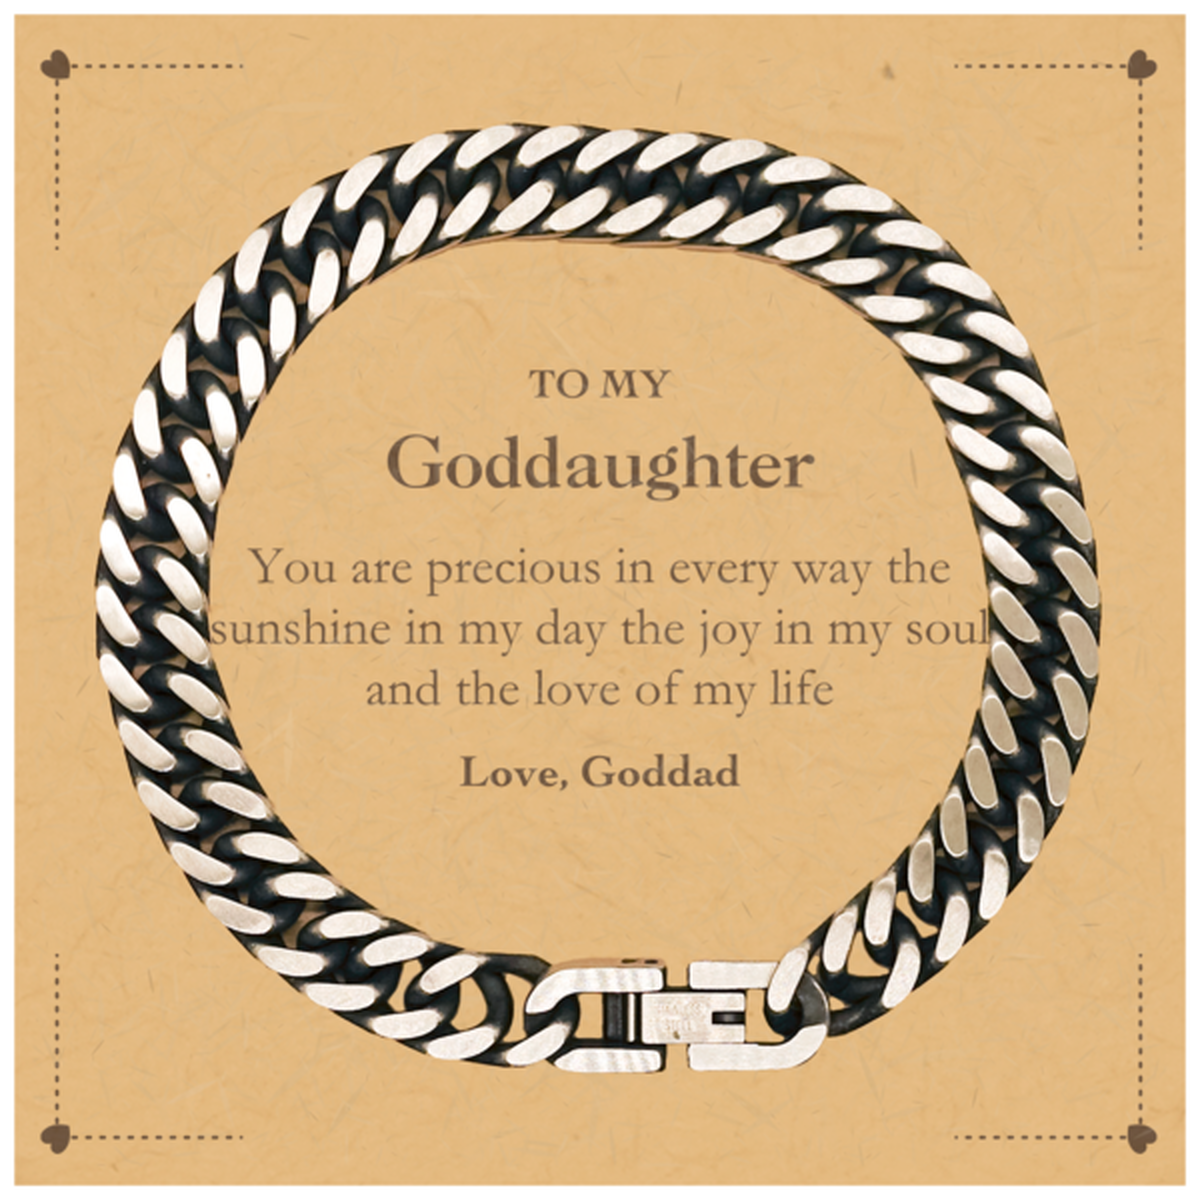 Graduation Gifts for Goddaughter Cuban Link Chain Bracelet Present from Goddad, Christmas Goddaughter Birthday Gifts Goddaughter You are precious in every way the sunshine in my day. Love, Goddad